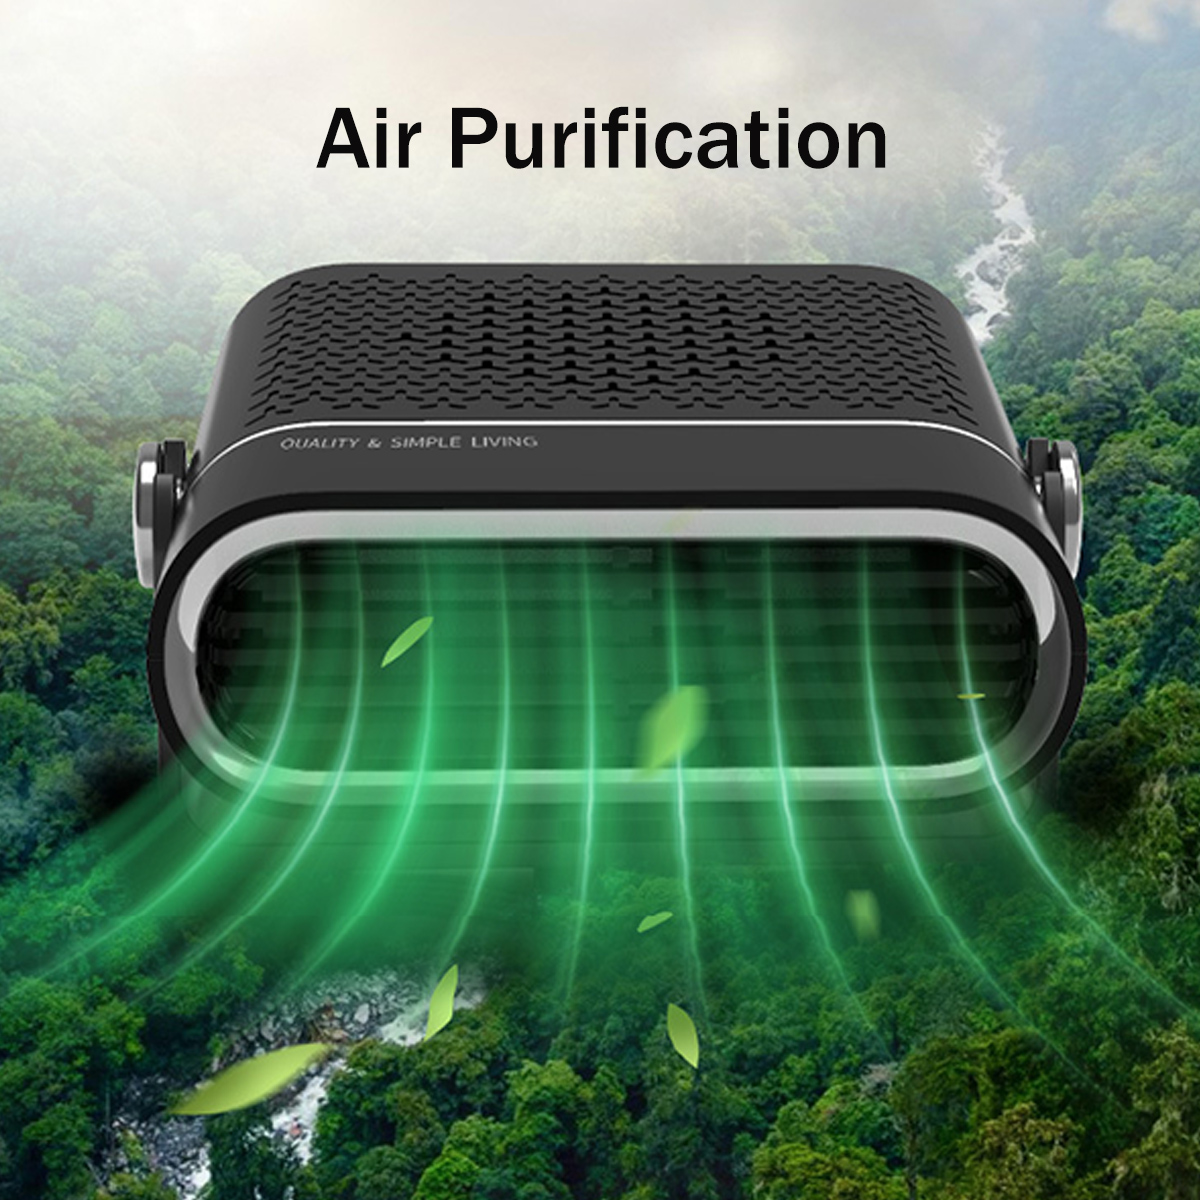 Portable-Car-Heater-Fast-Heating-Fan-360-Degree-Rotary-Winter-Defroster-Demisting-Air-Purification-1-1773296-2